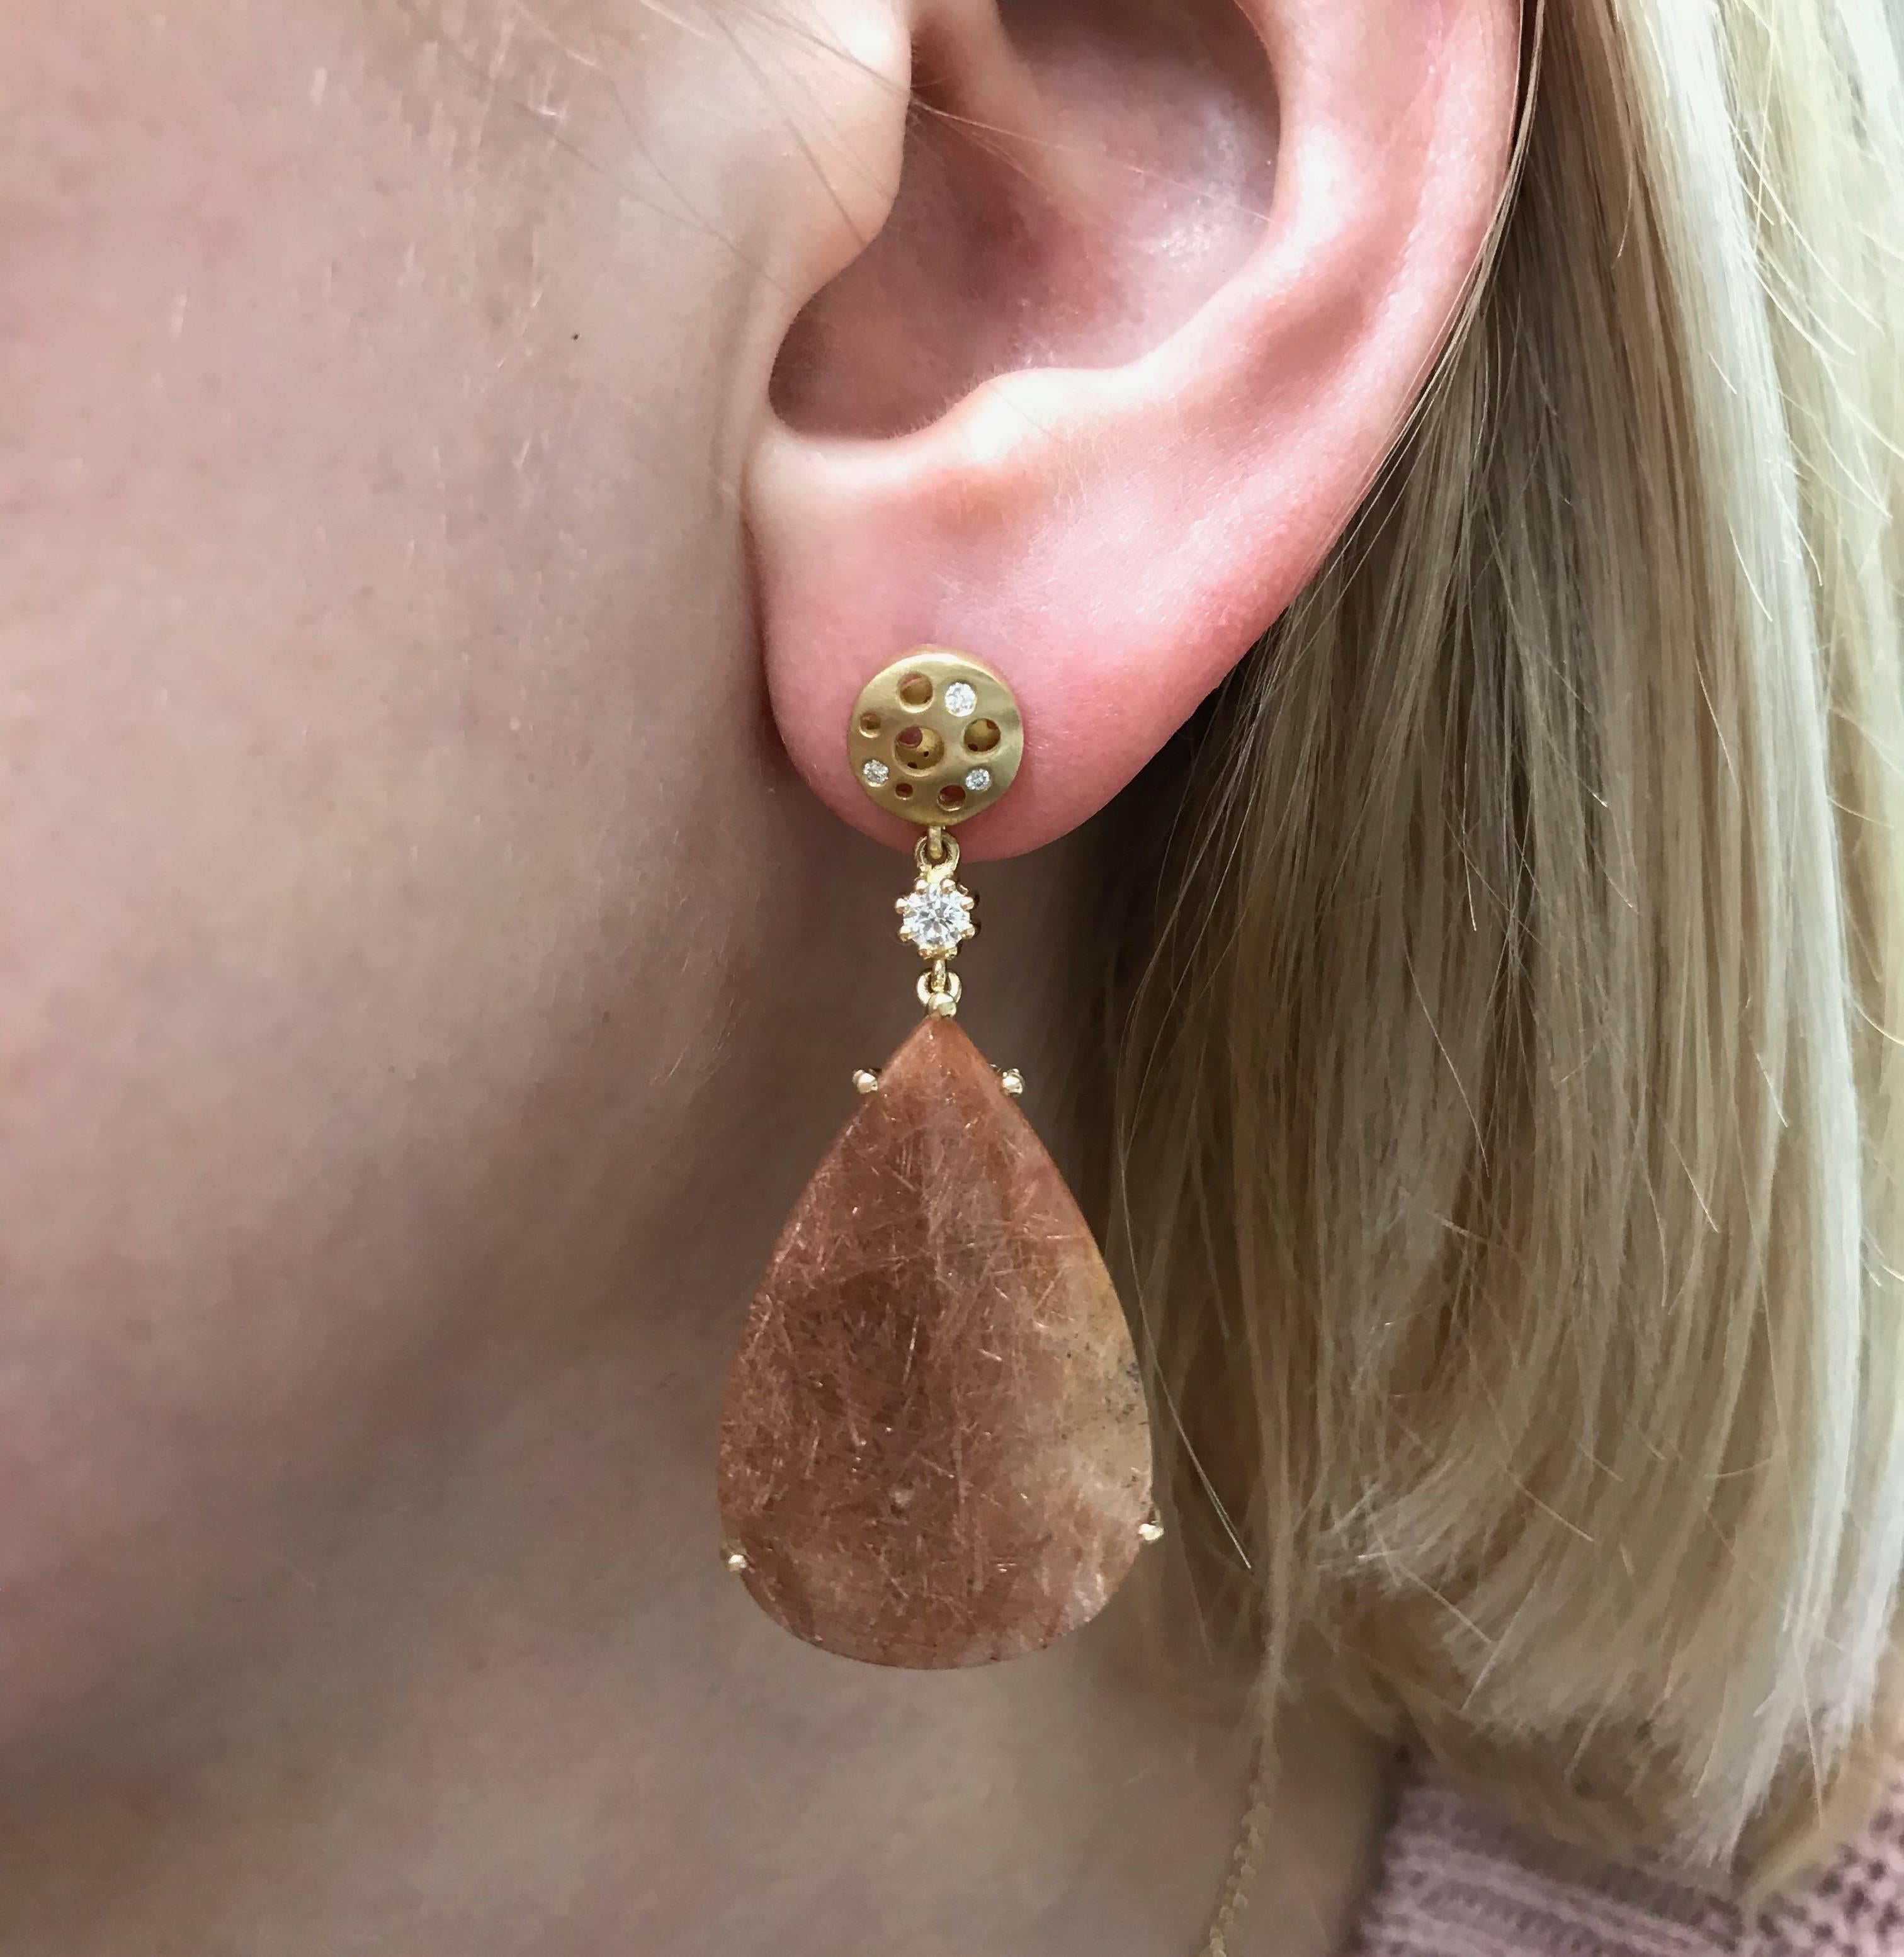 This redish, pinkish, slightly translucent rutilated quartz pair was so beautiful, they were screaming to become a pair of drop earrings. I chose to leave the design simple in the front to compliment the breathtaking beauty of these quartzes, whose